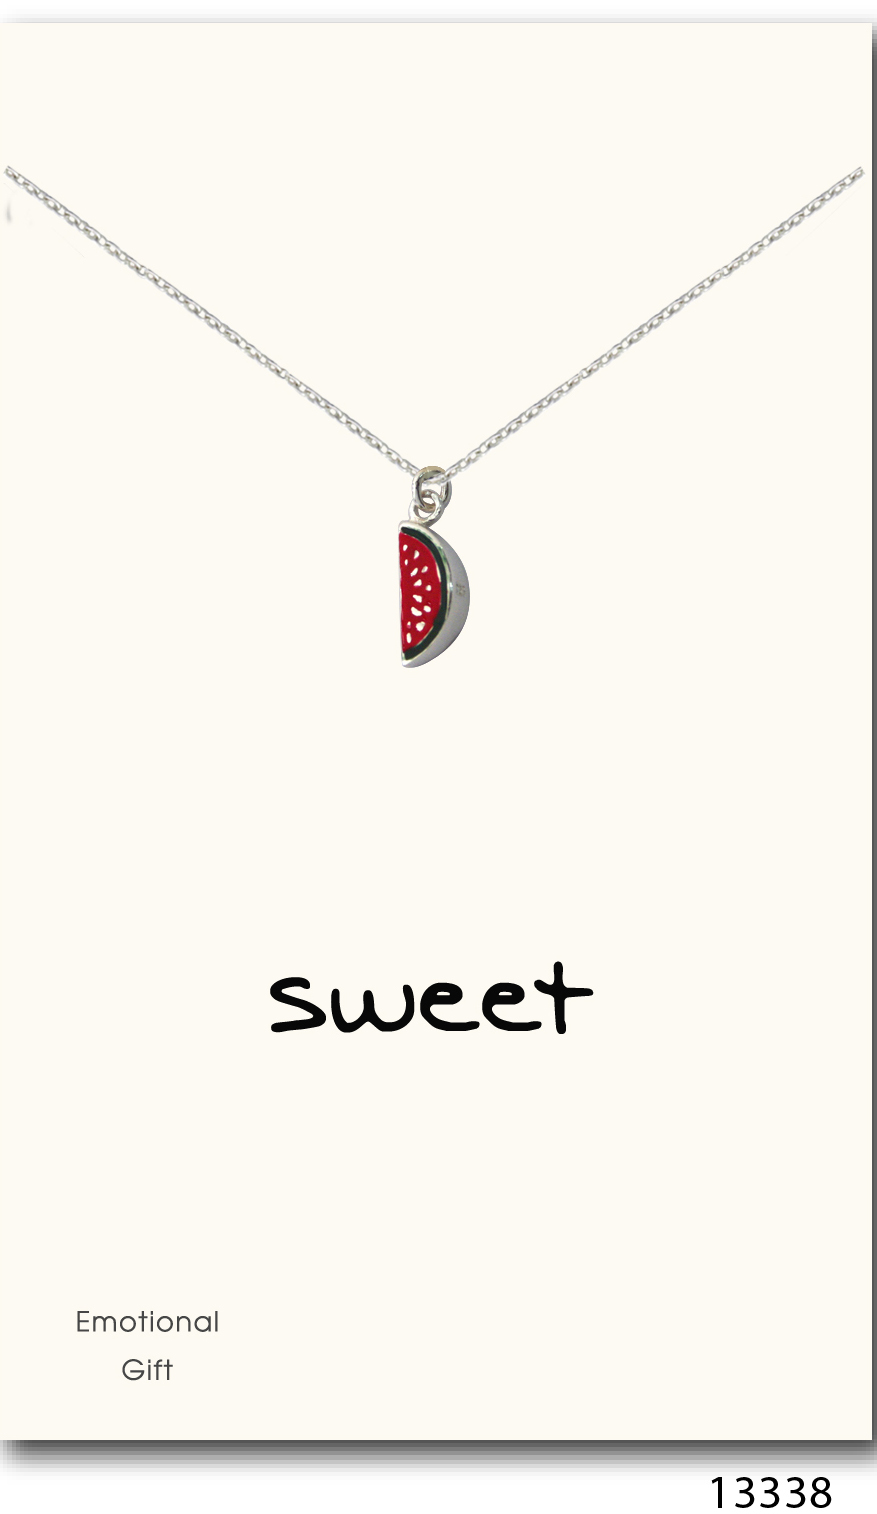 The sweet watermelon pendant necklace